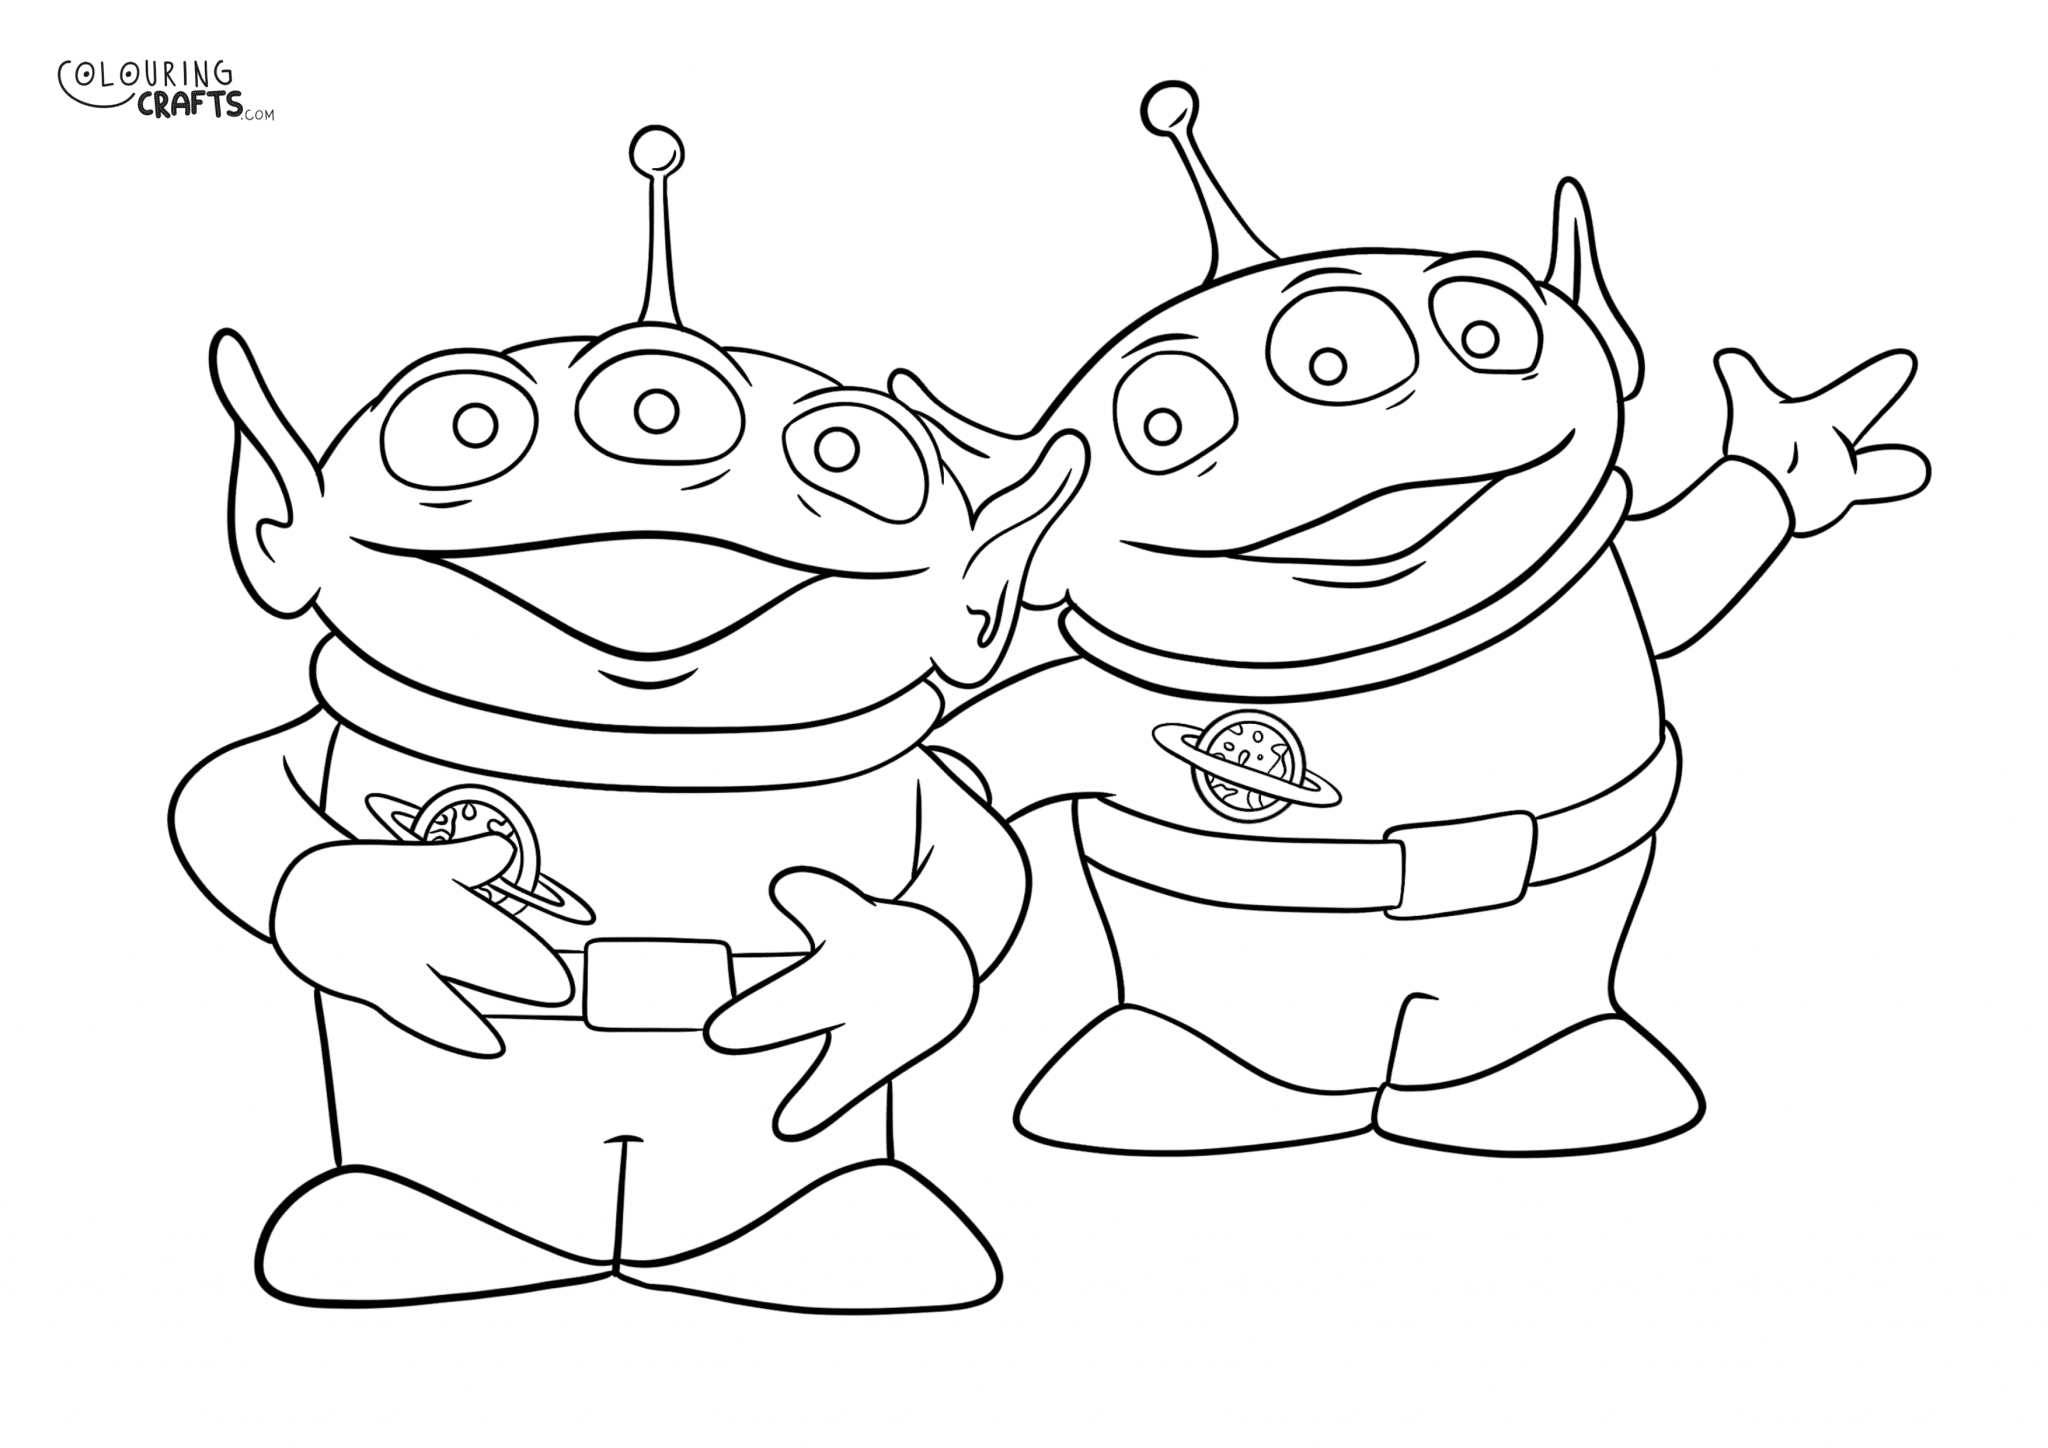 Toy Story Woody And Aliens Colouring Page - Colouring Crafts